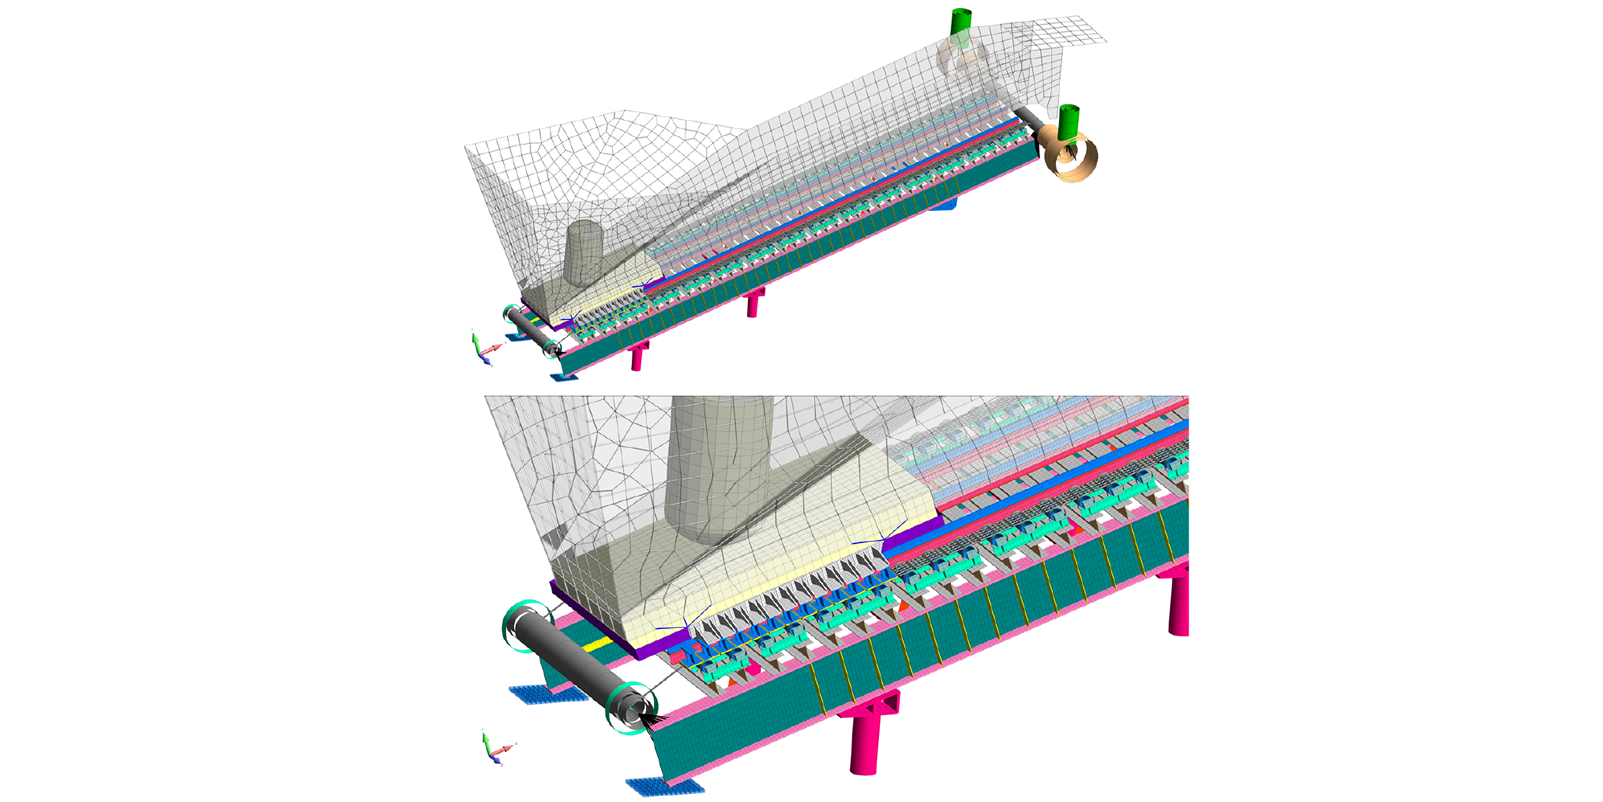 The Femap FEA model of the apron feeder system was constructed using a carefully mapped mesh of quad plate elements with beam elements for the chain and roller system.  The DEM particles were automatically created within LS-PrePost.